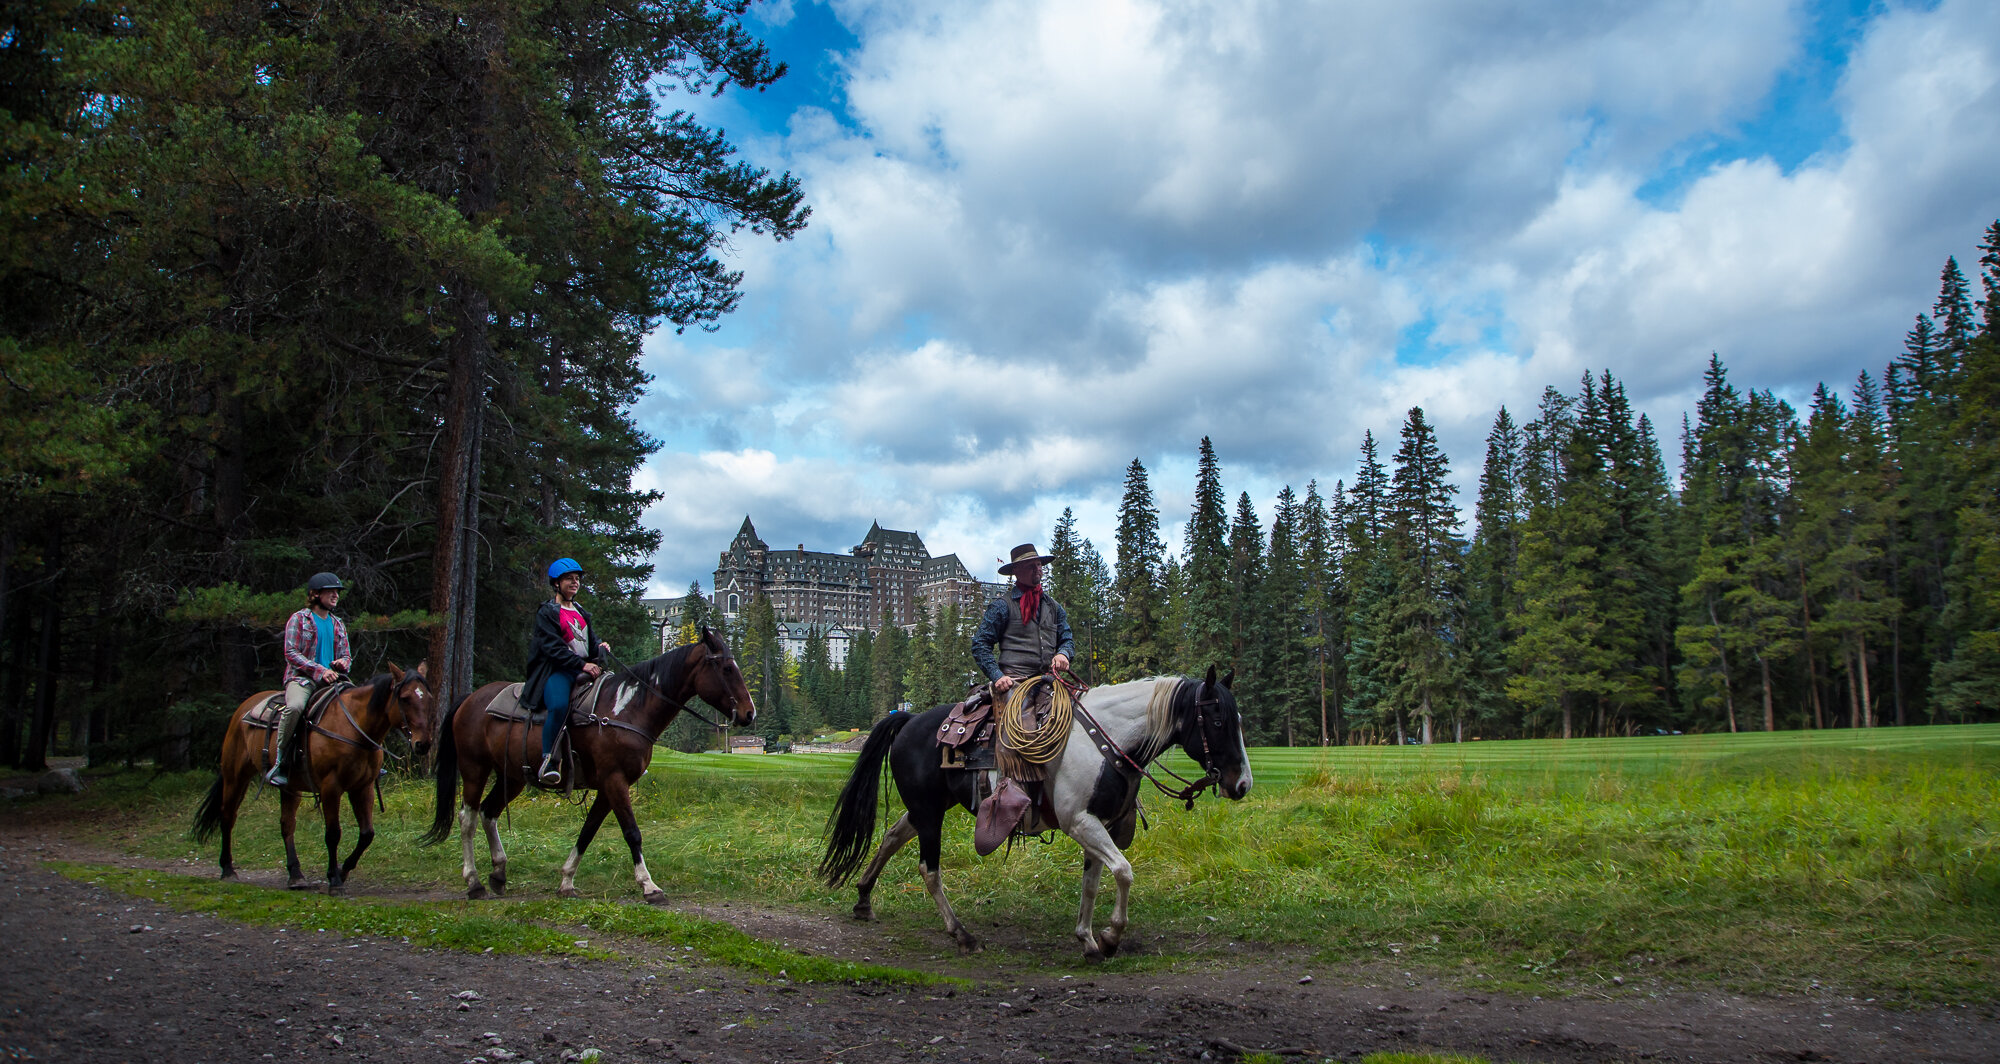 Horseback Riders on the golf course of the Banff Springs Hotel